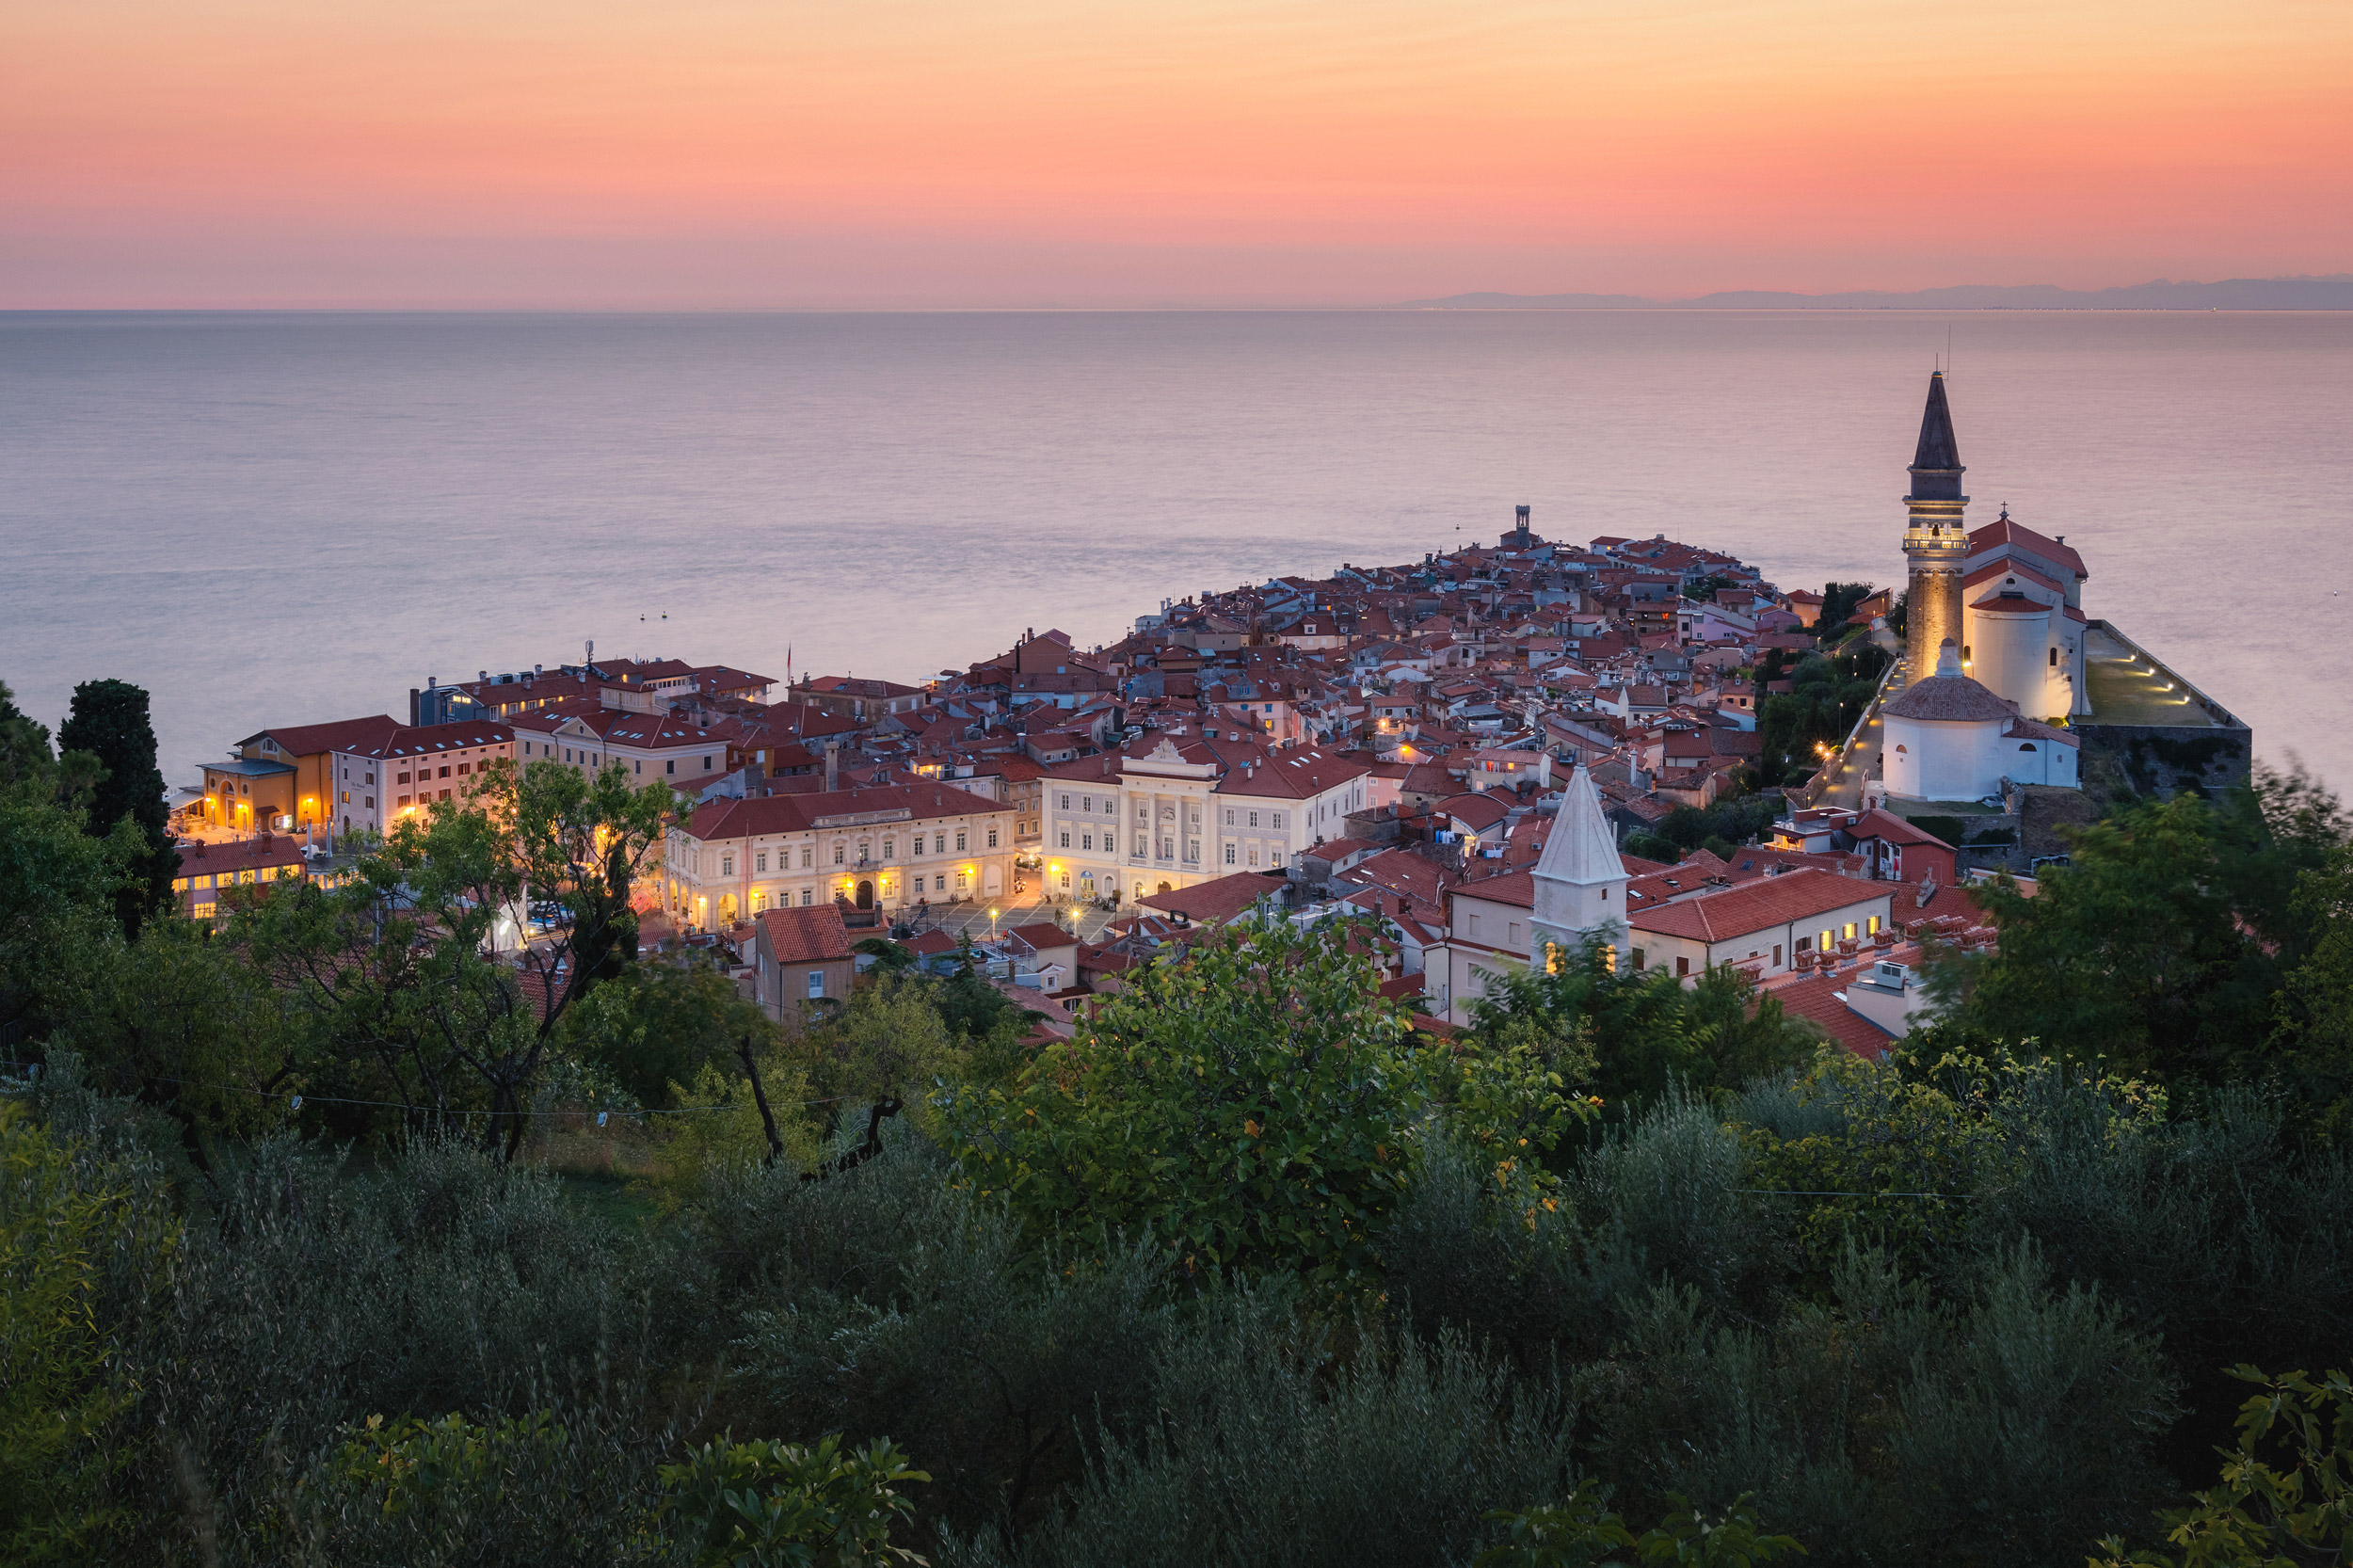 Romantic colorful sunset over picturesque old town Piran, Sloven